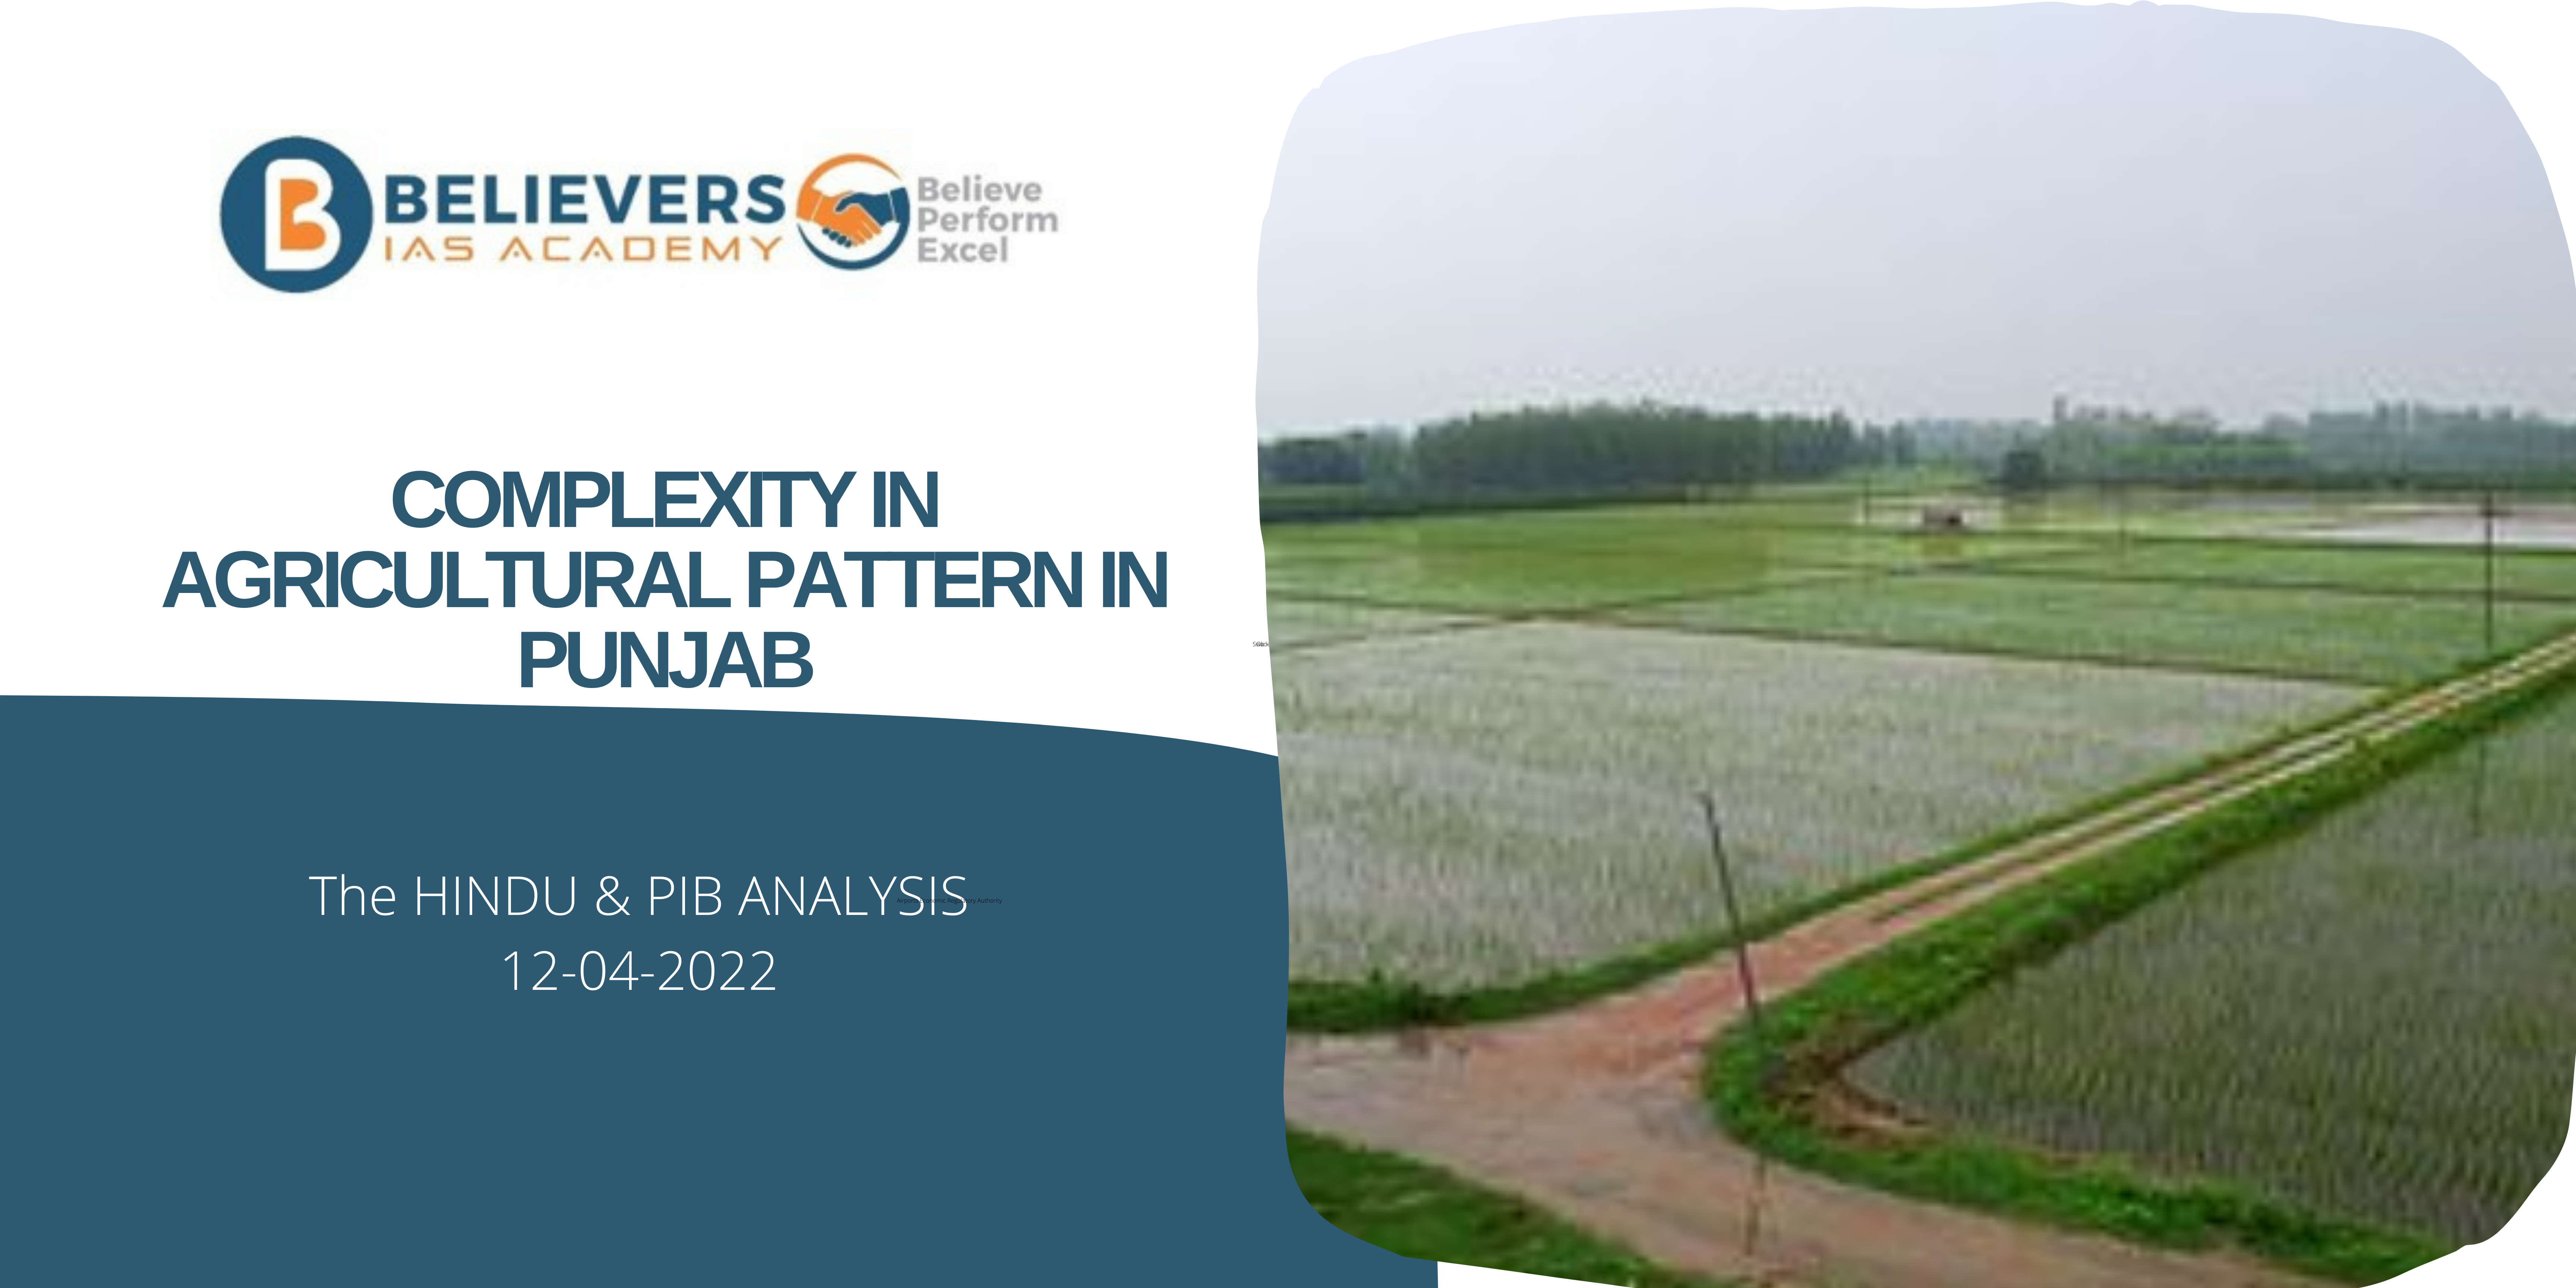 UPSC Current affairs - Complexity in Agricultural Pattern in Punjab